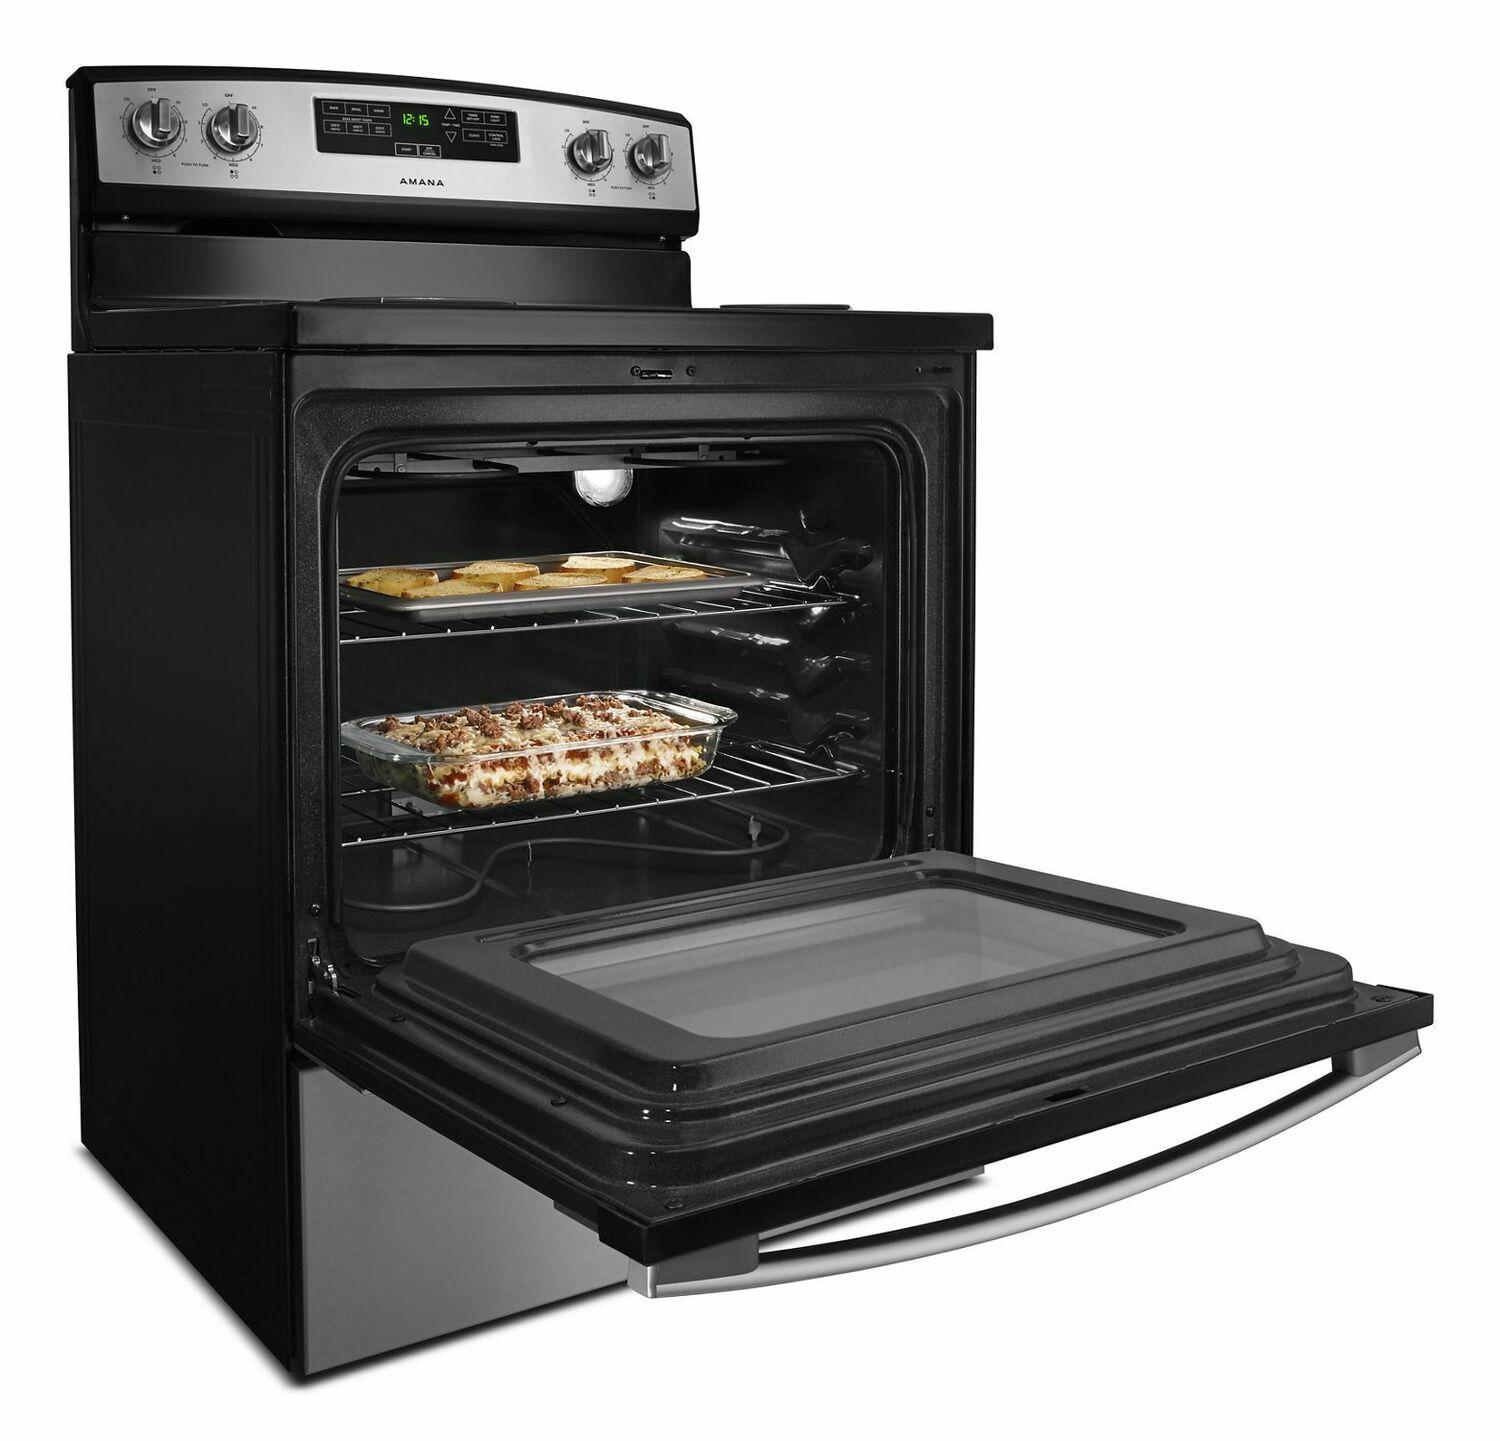 30-inch Amana® Electric Range with Bake Assist Temps - Black-on-Stainless